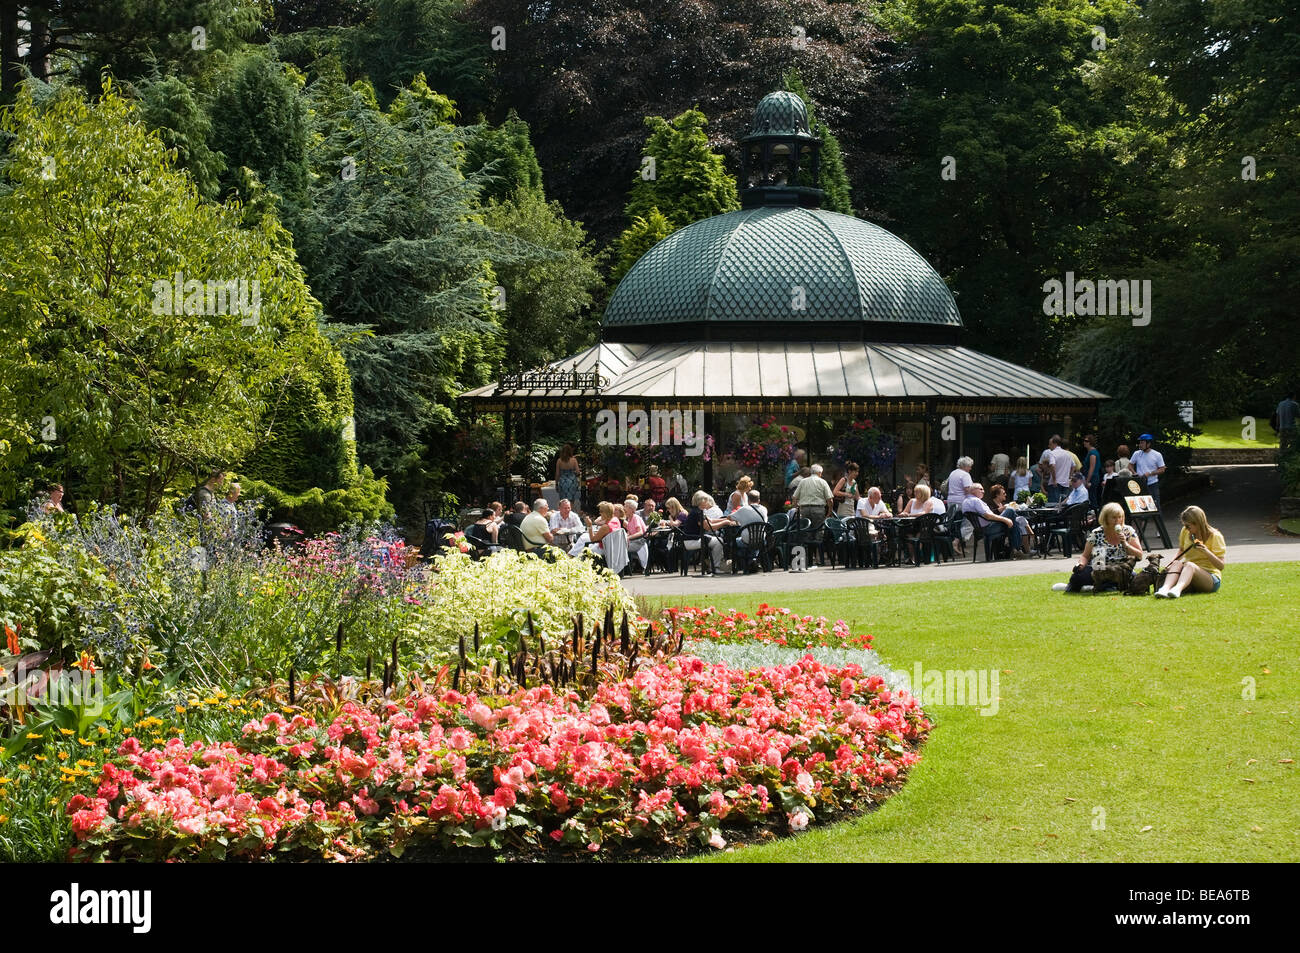 dh Valley Magnesia Well HARROGATE NORTH YORKSHIRE Al fresco Cafe park flowers outdoor uk blooms garden tearoom people outdoors gardens Stock Photo